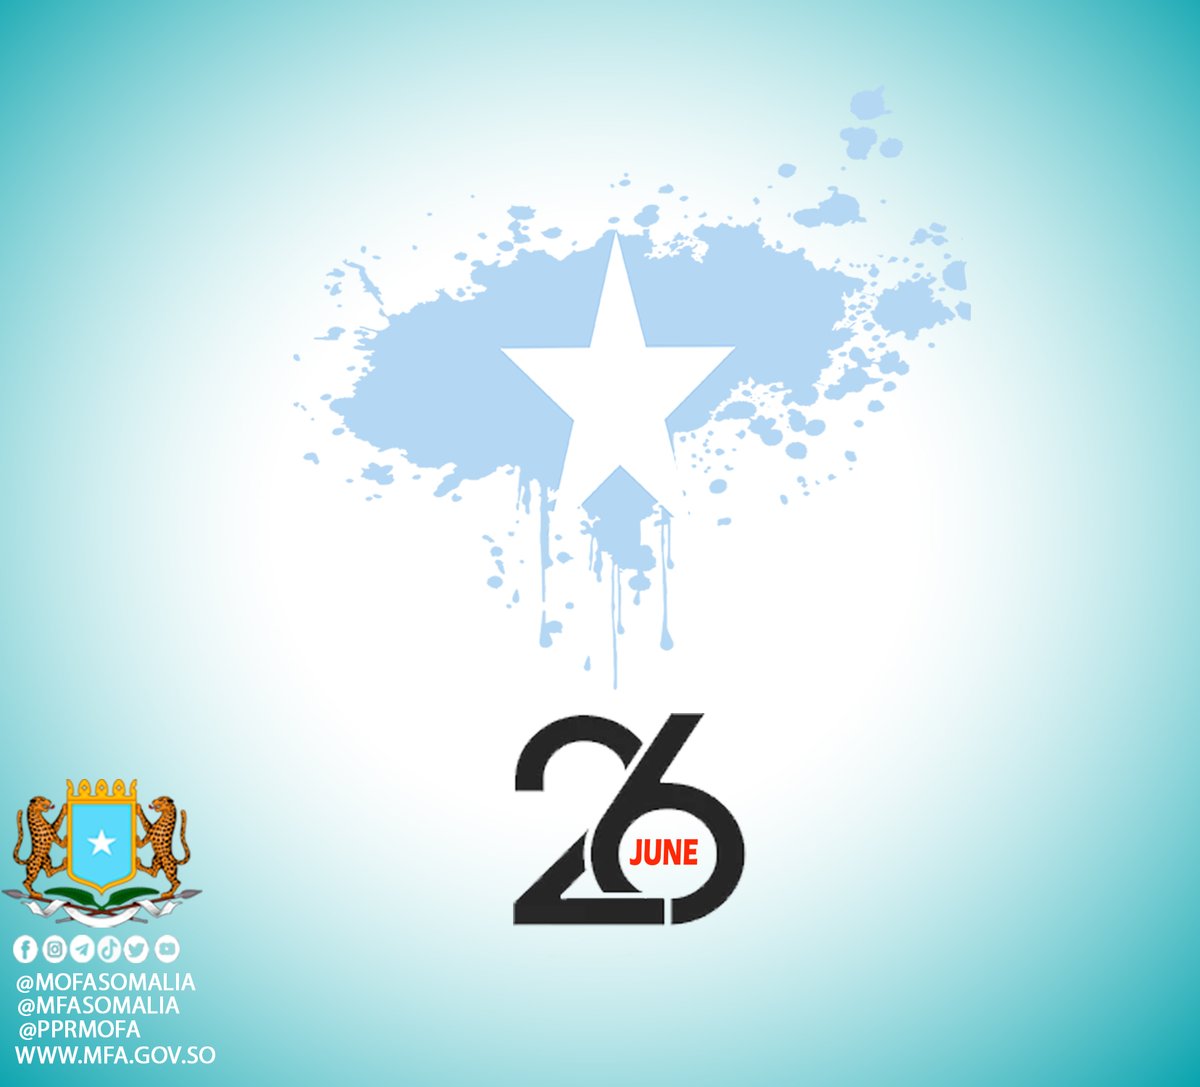 Congratulations to our people on the 62nd anniversary of independence. June 26 - The northern #Somali regions gained independence from British colonialism. July 1 - #IndependenceDay of #Somalia and the unity of the northern and southern regions. #Mogadishu #Hargeisa